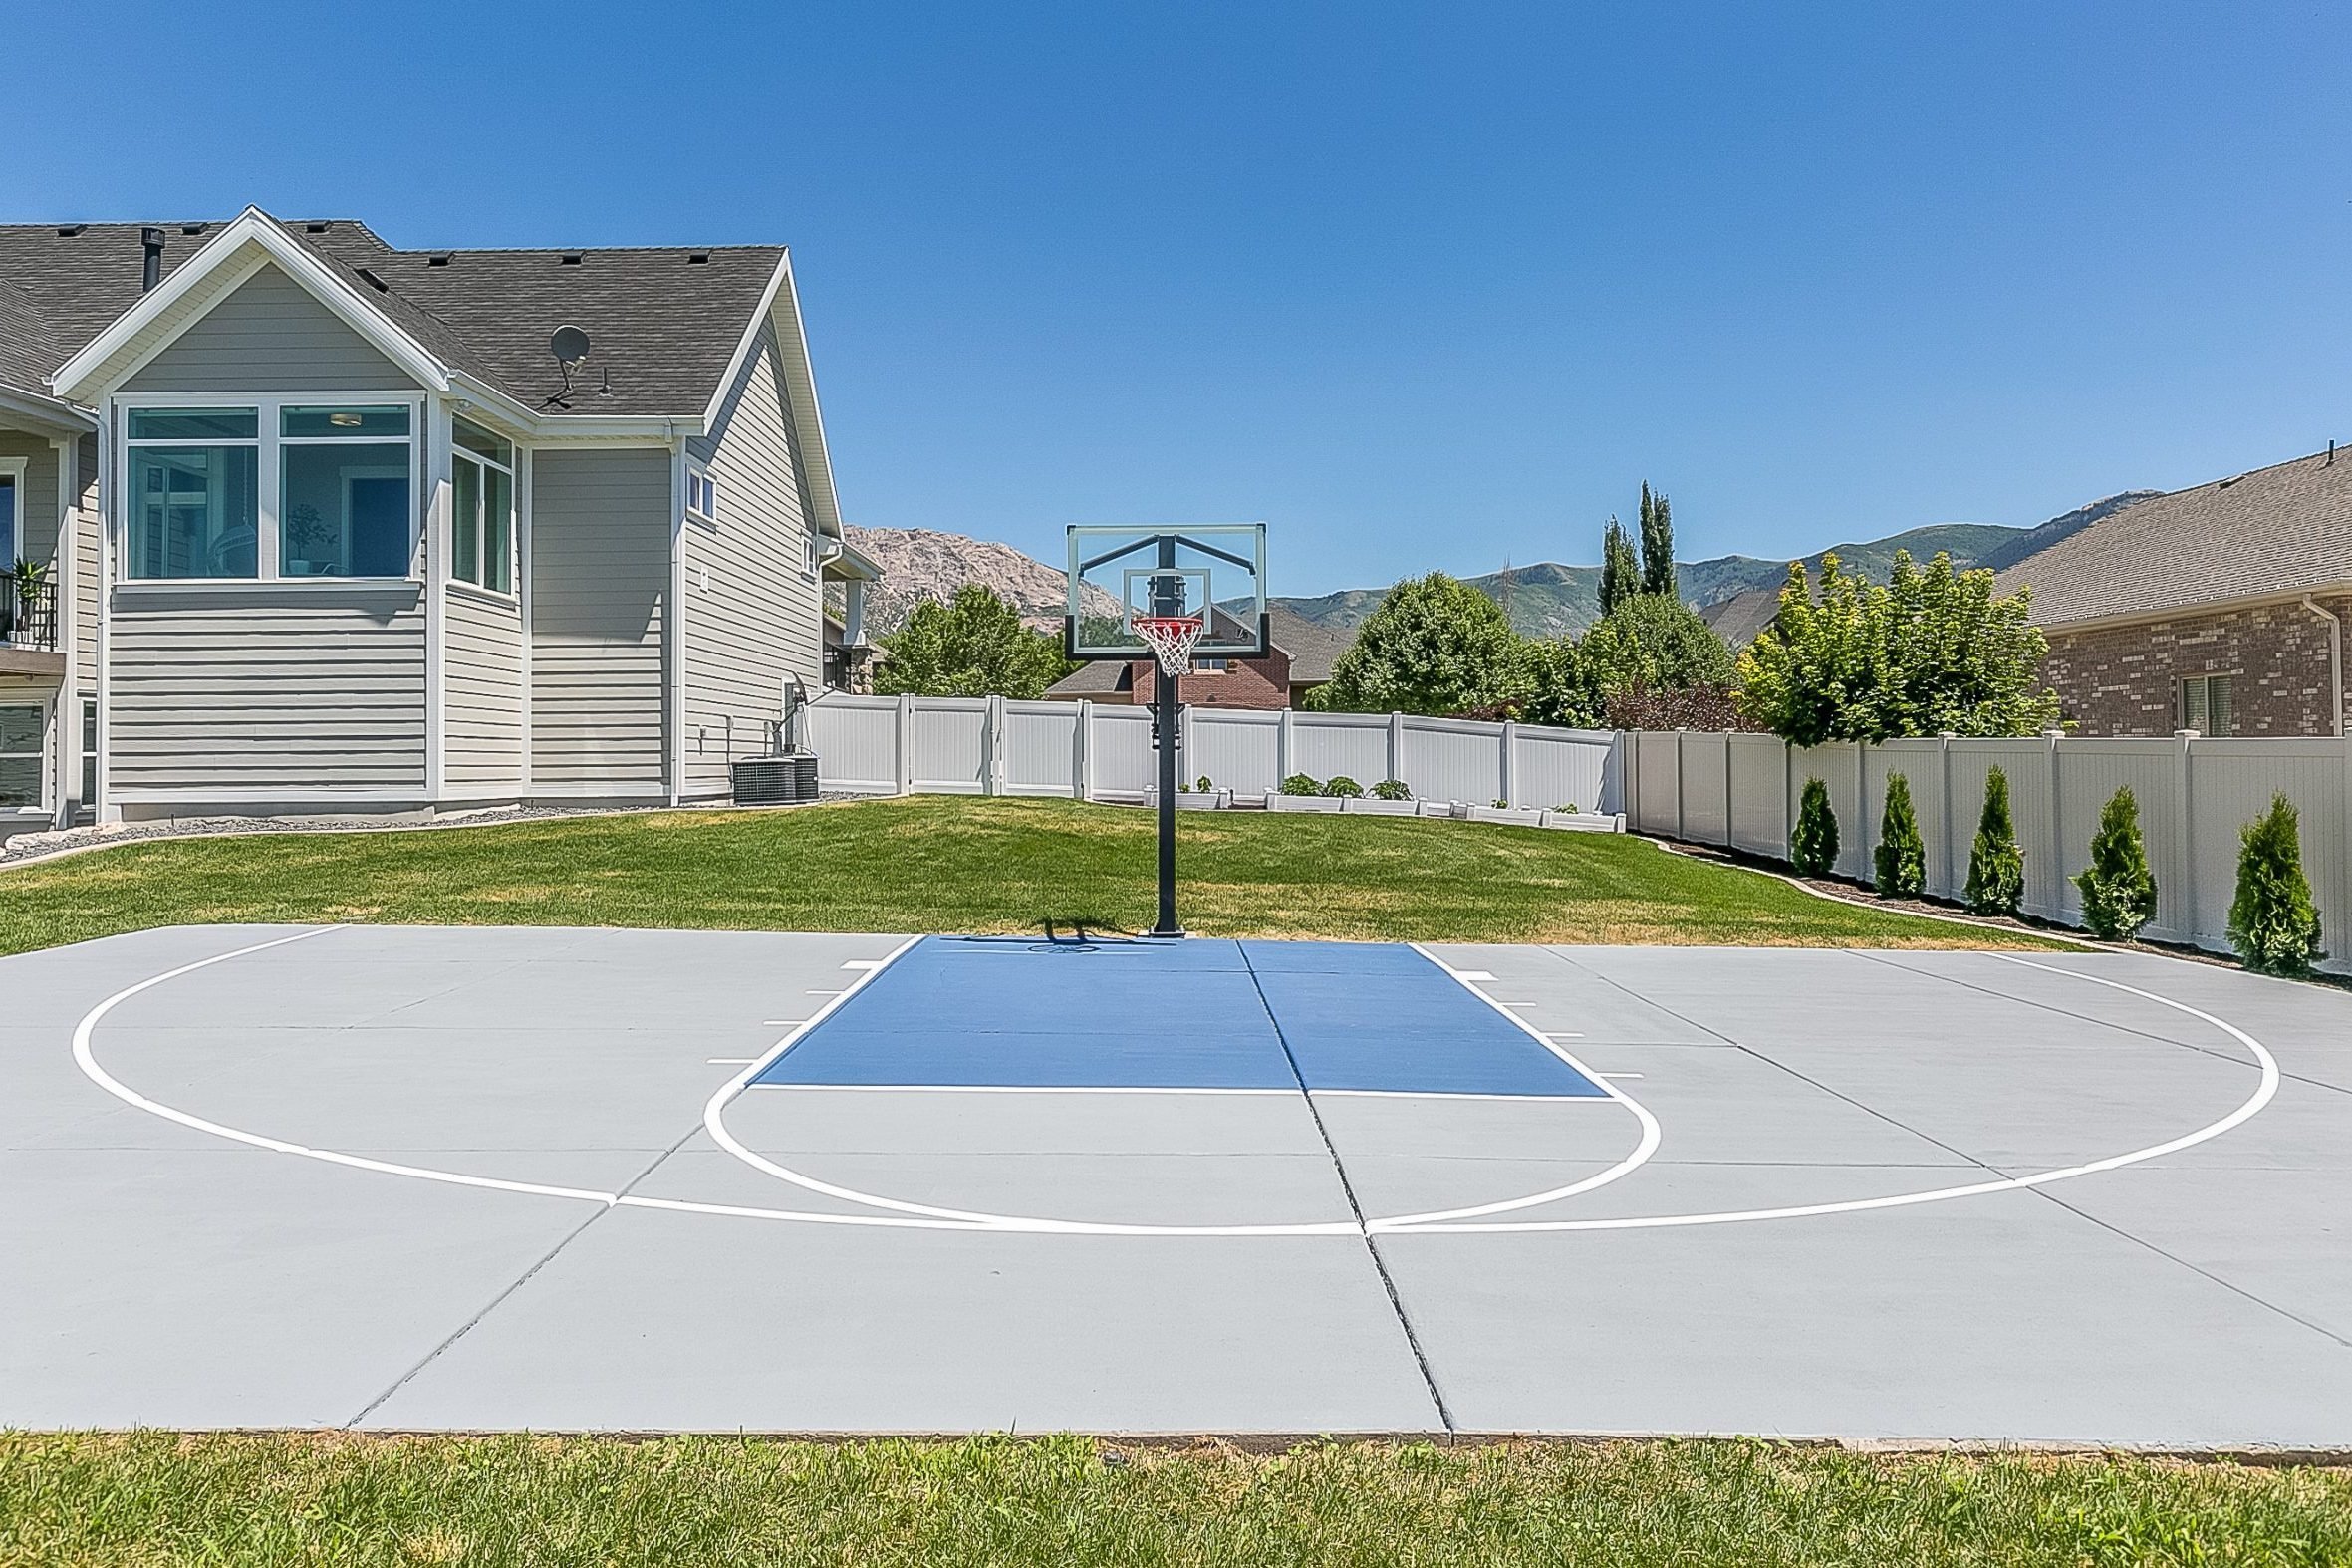 Where Is The Best outdoor basketball court?